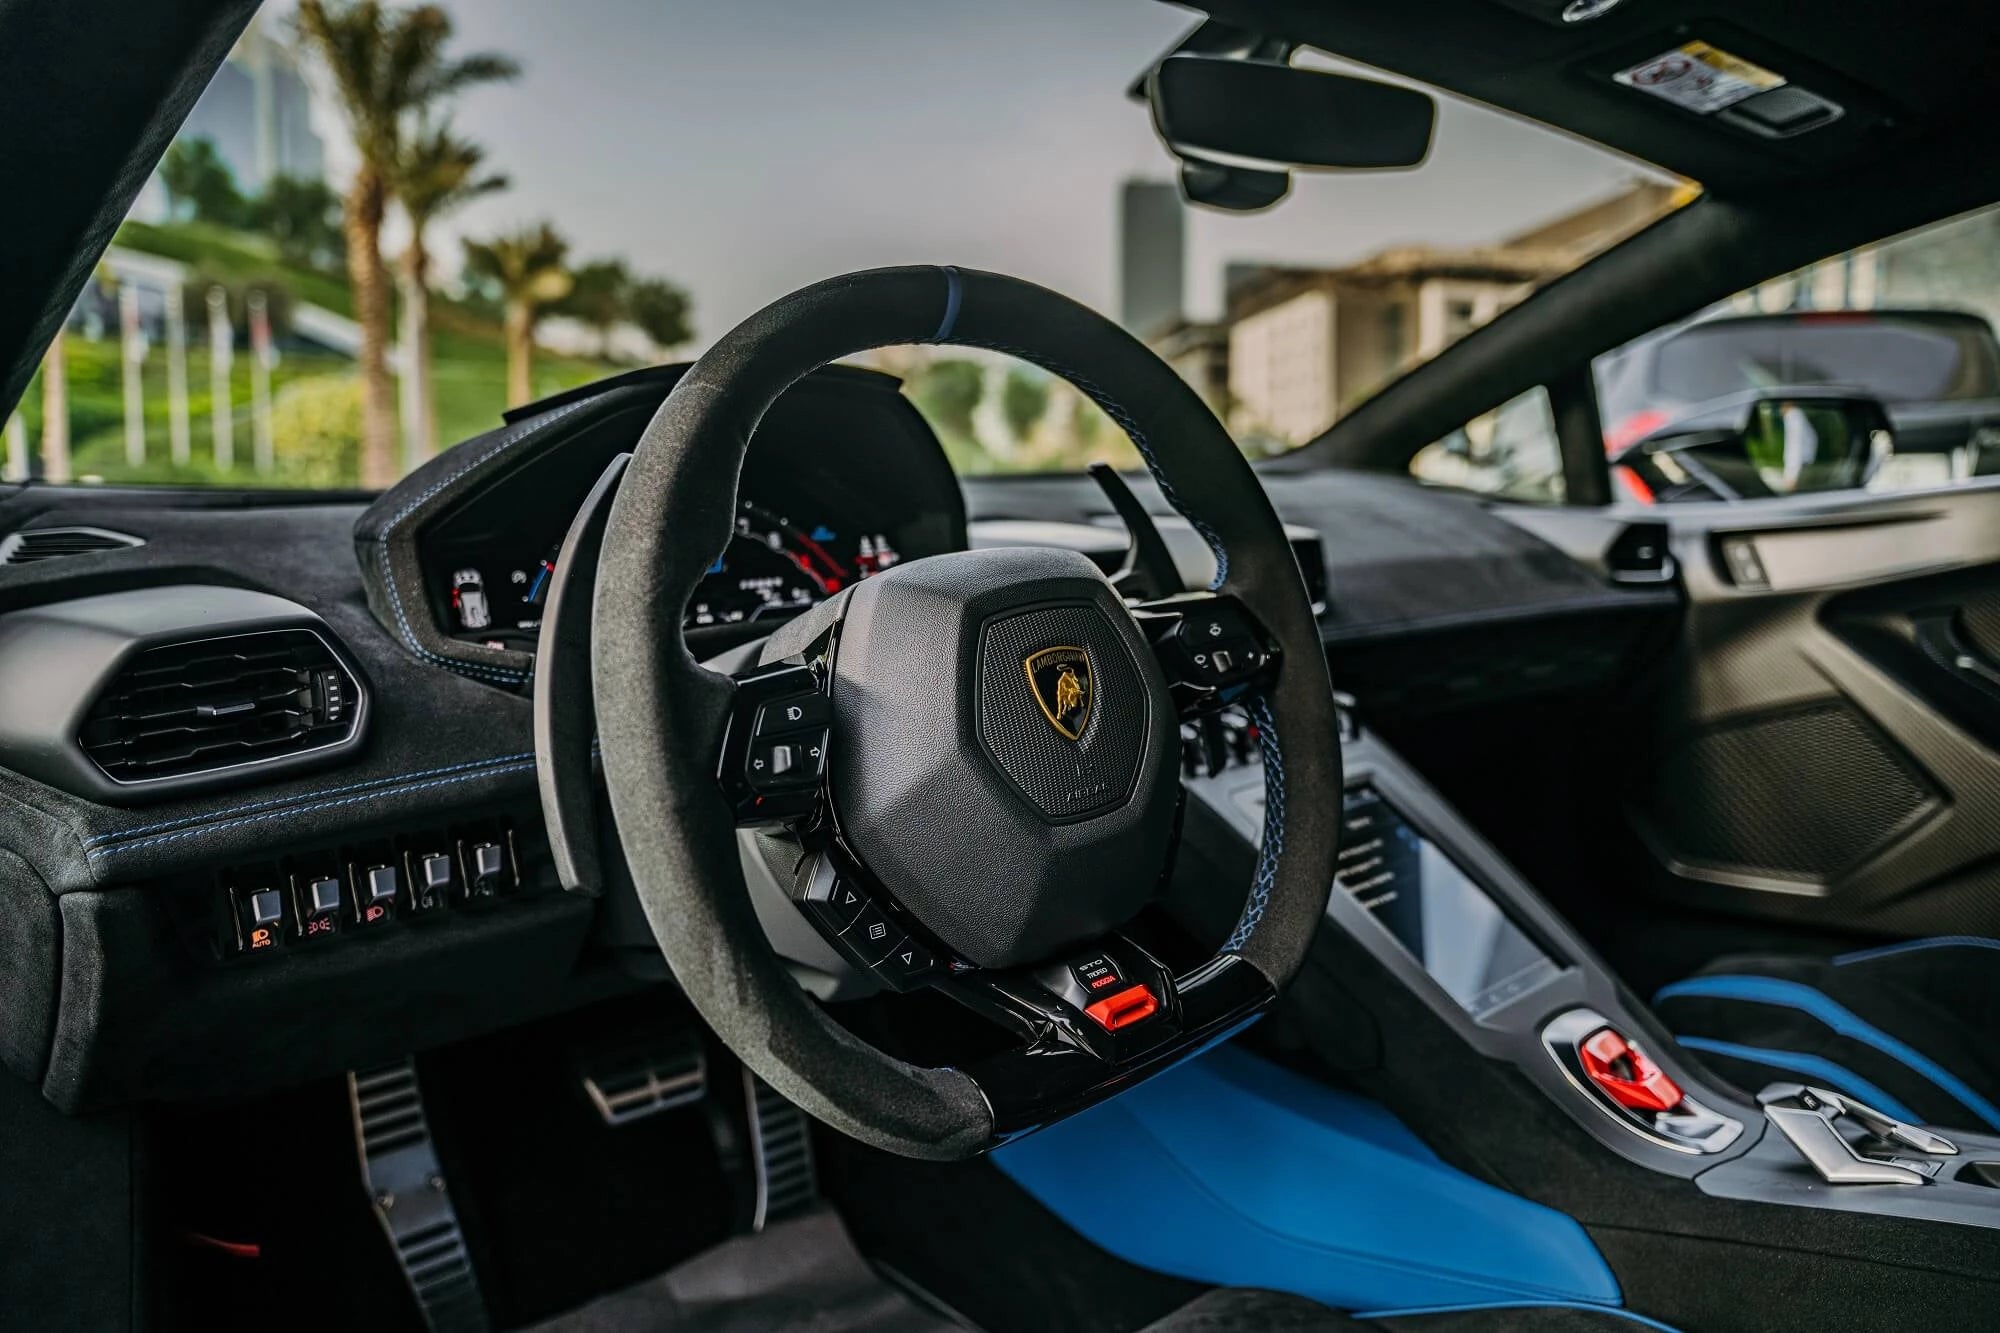 Experience the thrill of a 2022 Lamborghini Huracan STO Black Matt in Dubai. This luxury supercar boasts 640 horsepower, accelerates from 0 to 100 km/h in 2.8 seconds, and reaches a maximum speed of 310 km/h. With automatic transmission, feel the adrenaline on Dubai's roads. Enjoy an intimate driving experience with two seats for exclusivity.